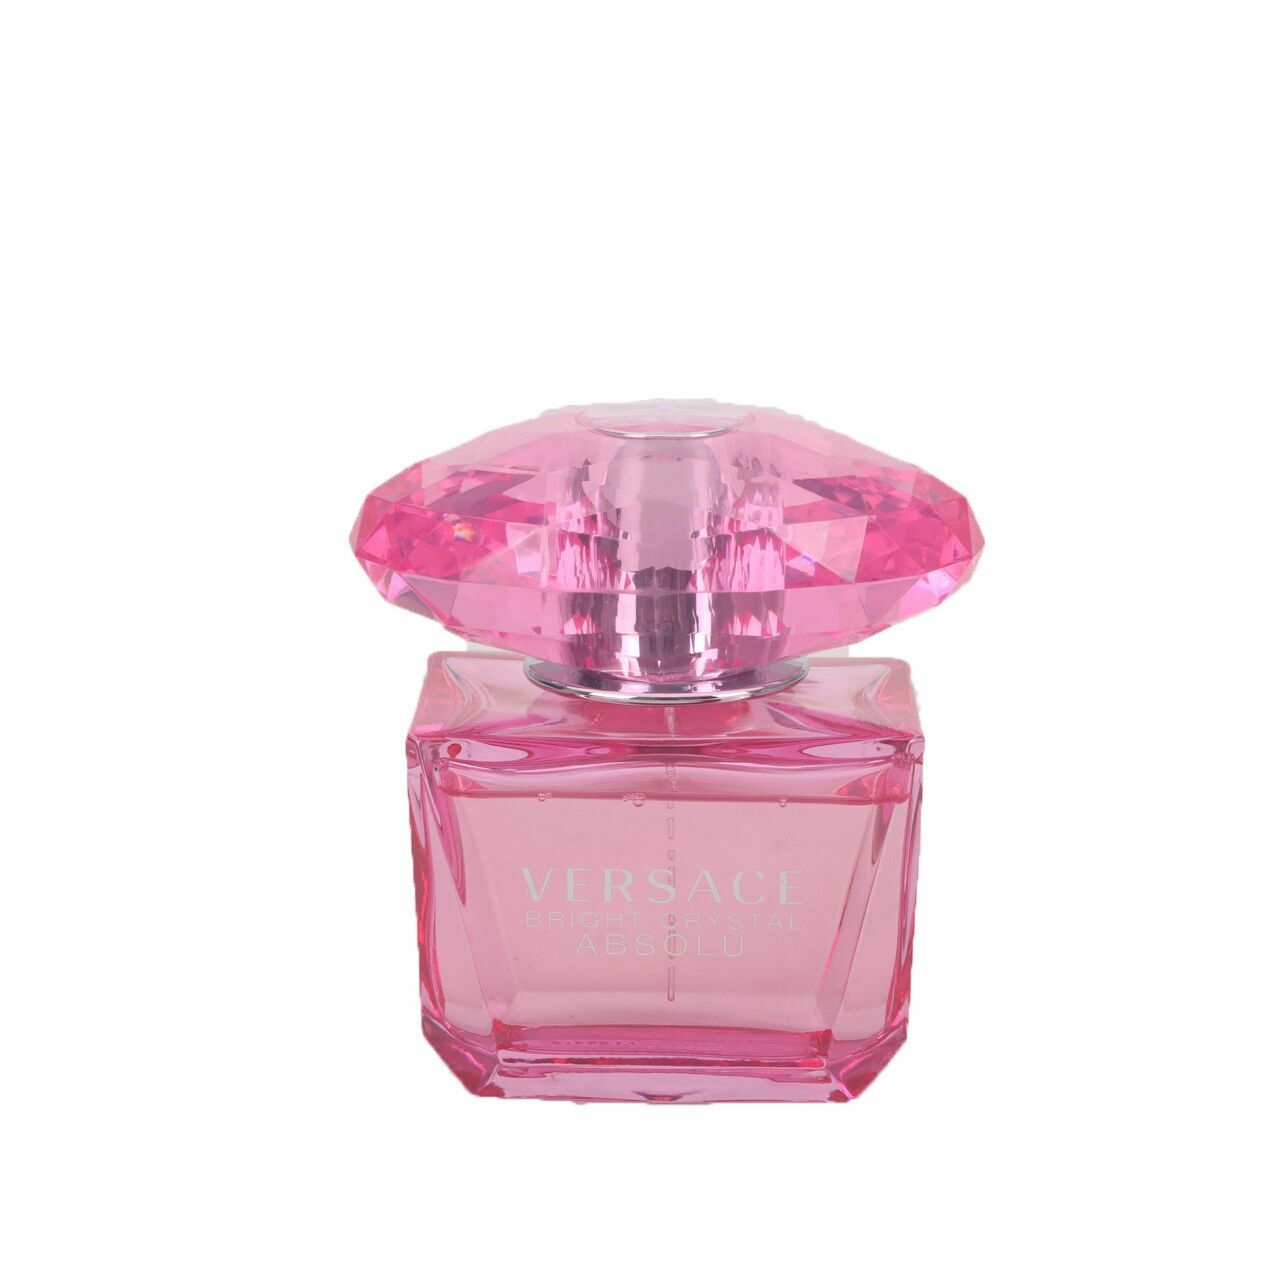 Versace Bright Crystal For Women Edt 90ml Fragrance